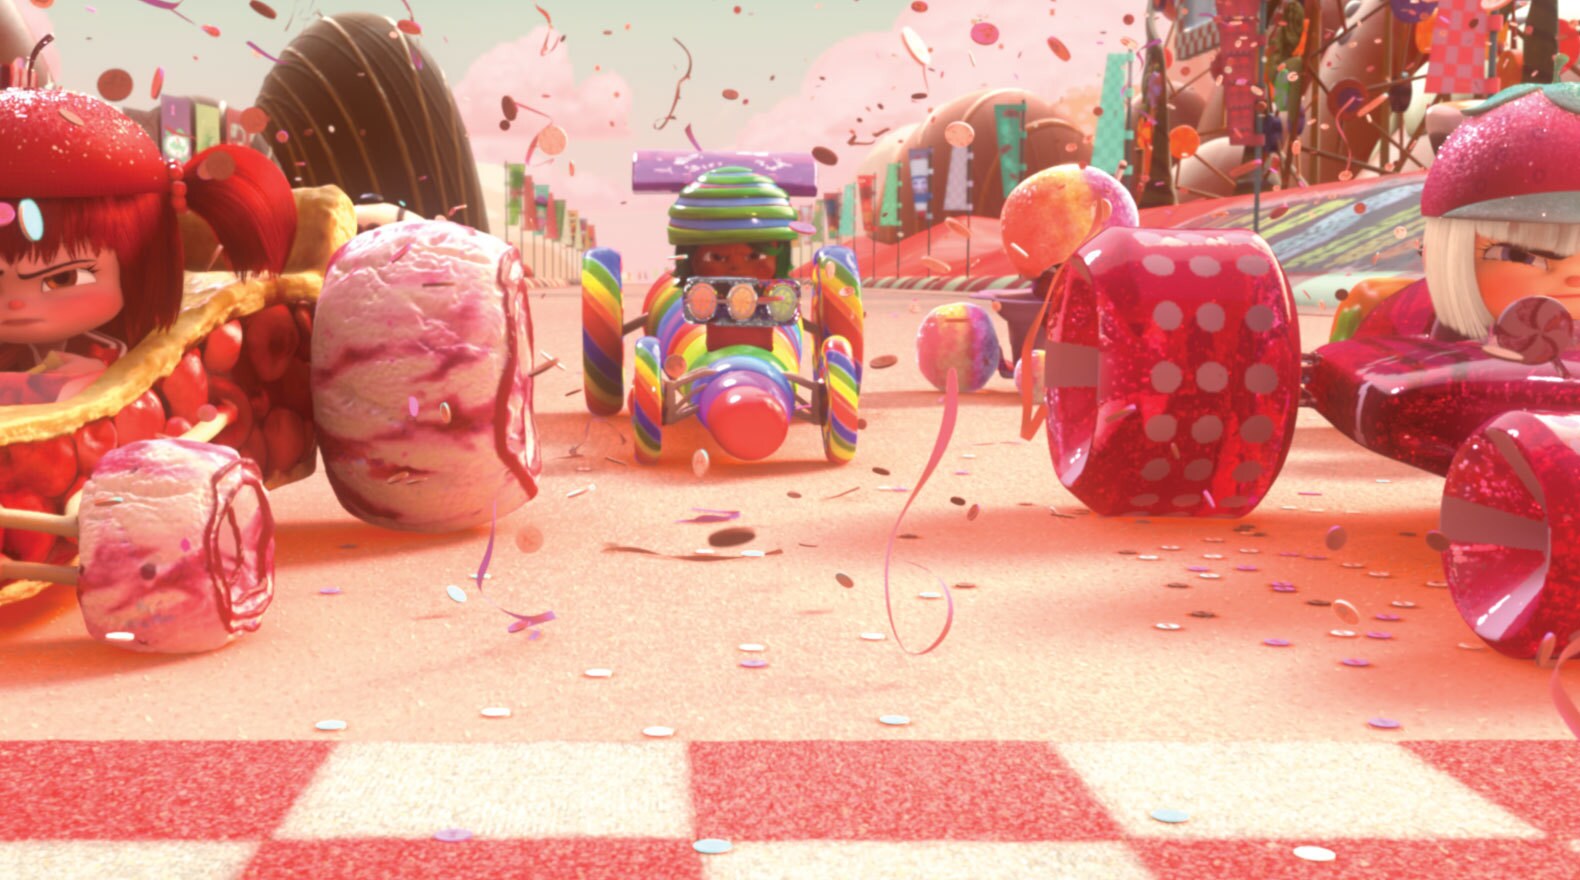 Three Sugar Rush races in their cars ready to start a race in "Wreck-It Ralph"